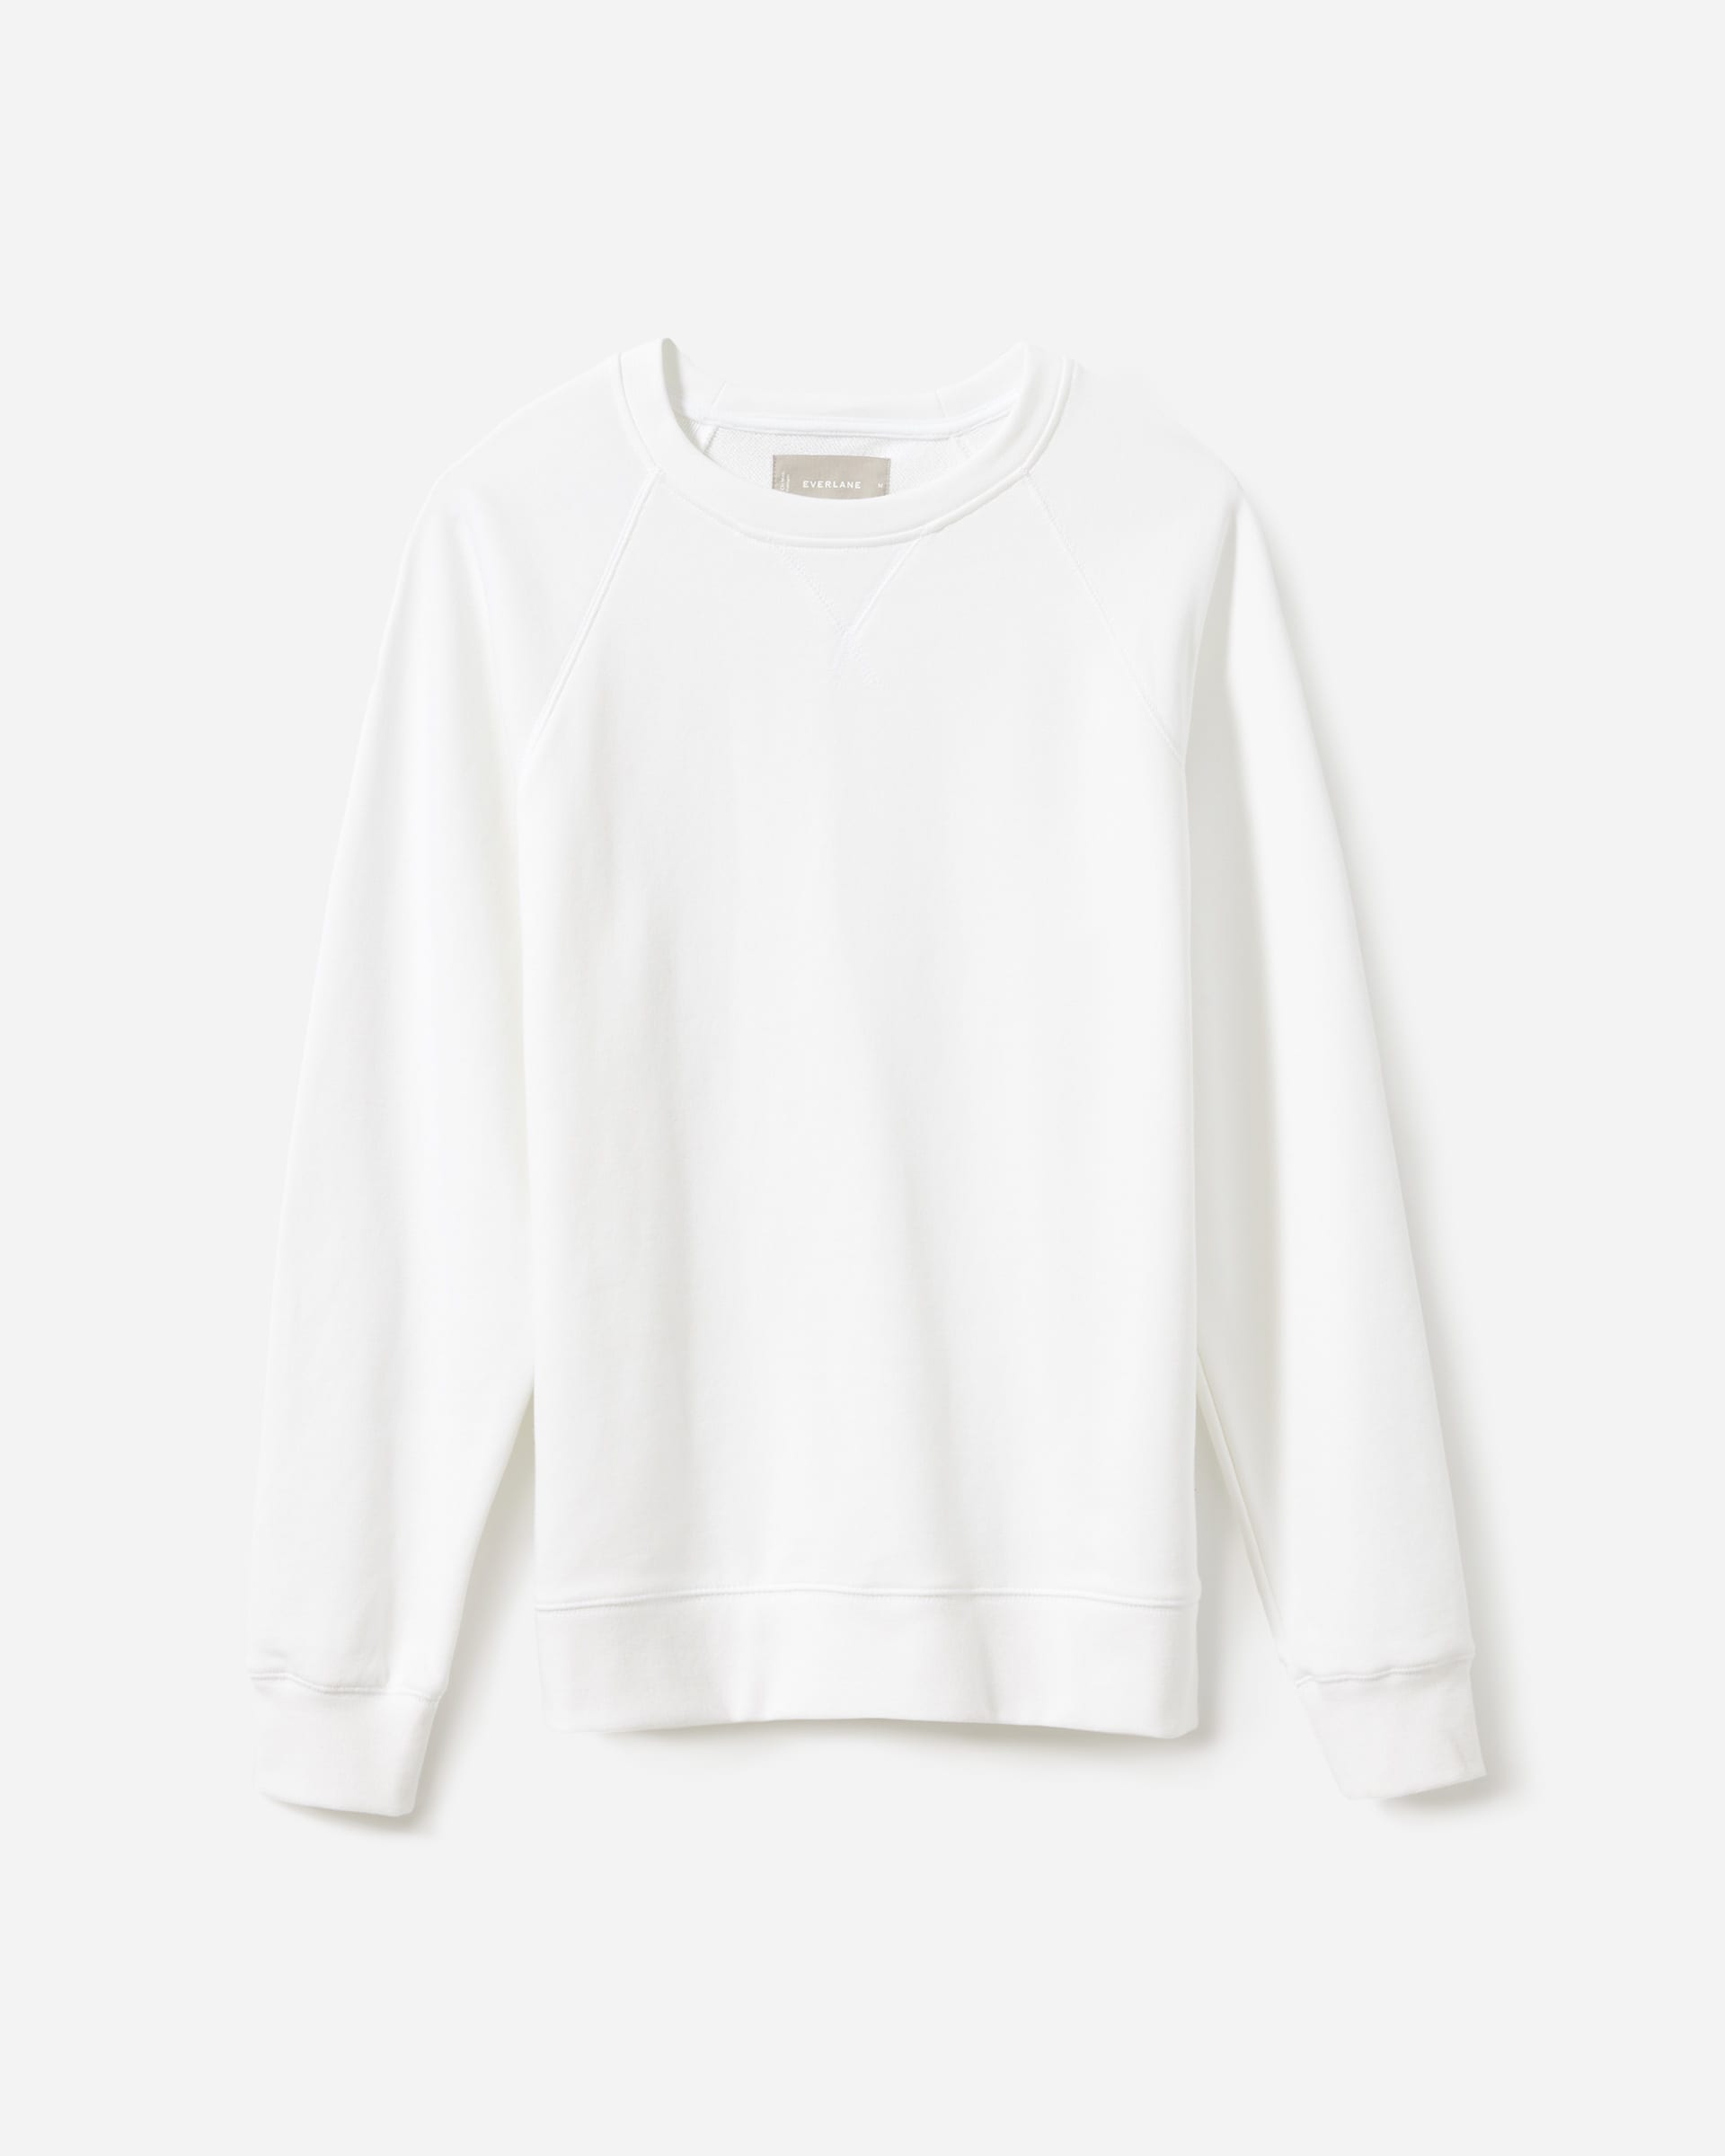 The Lightweight French Terry Crew White – Everlane